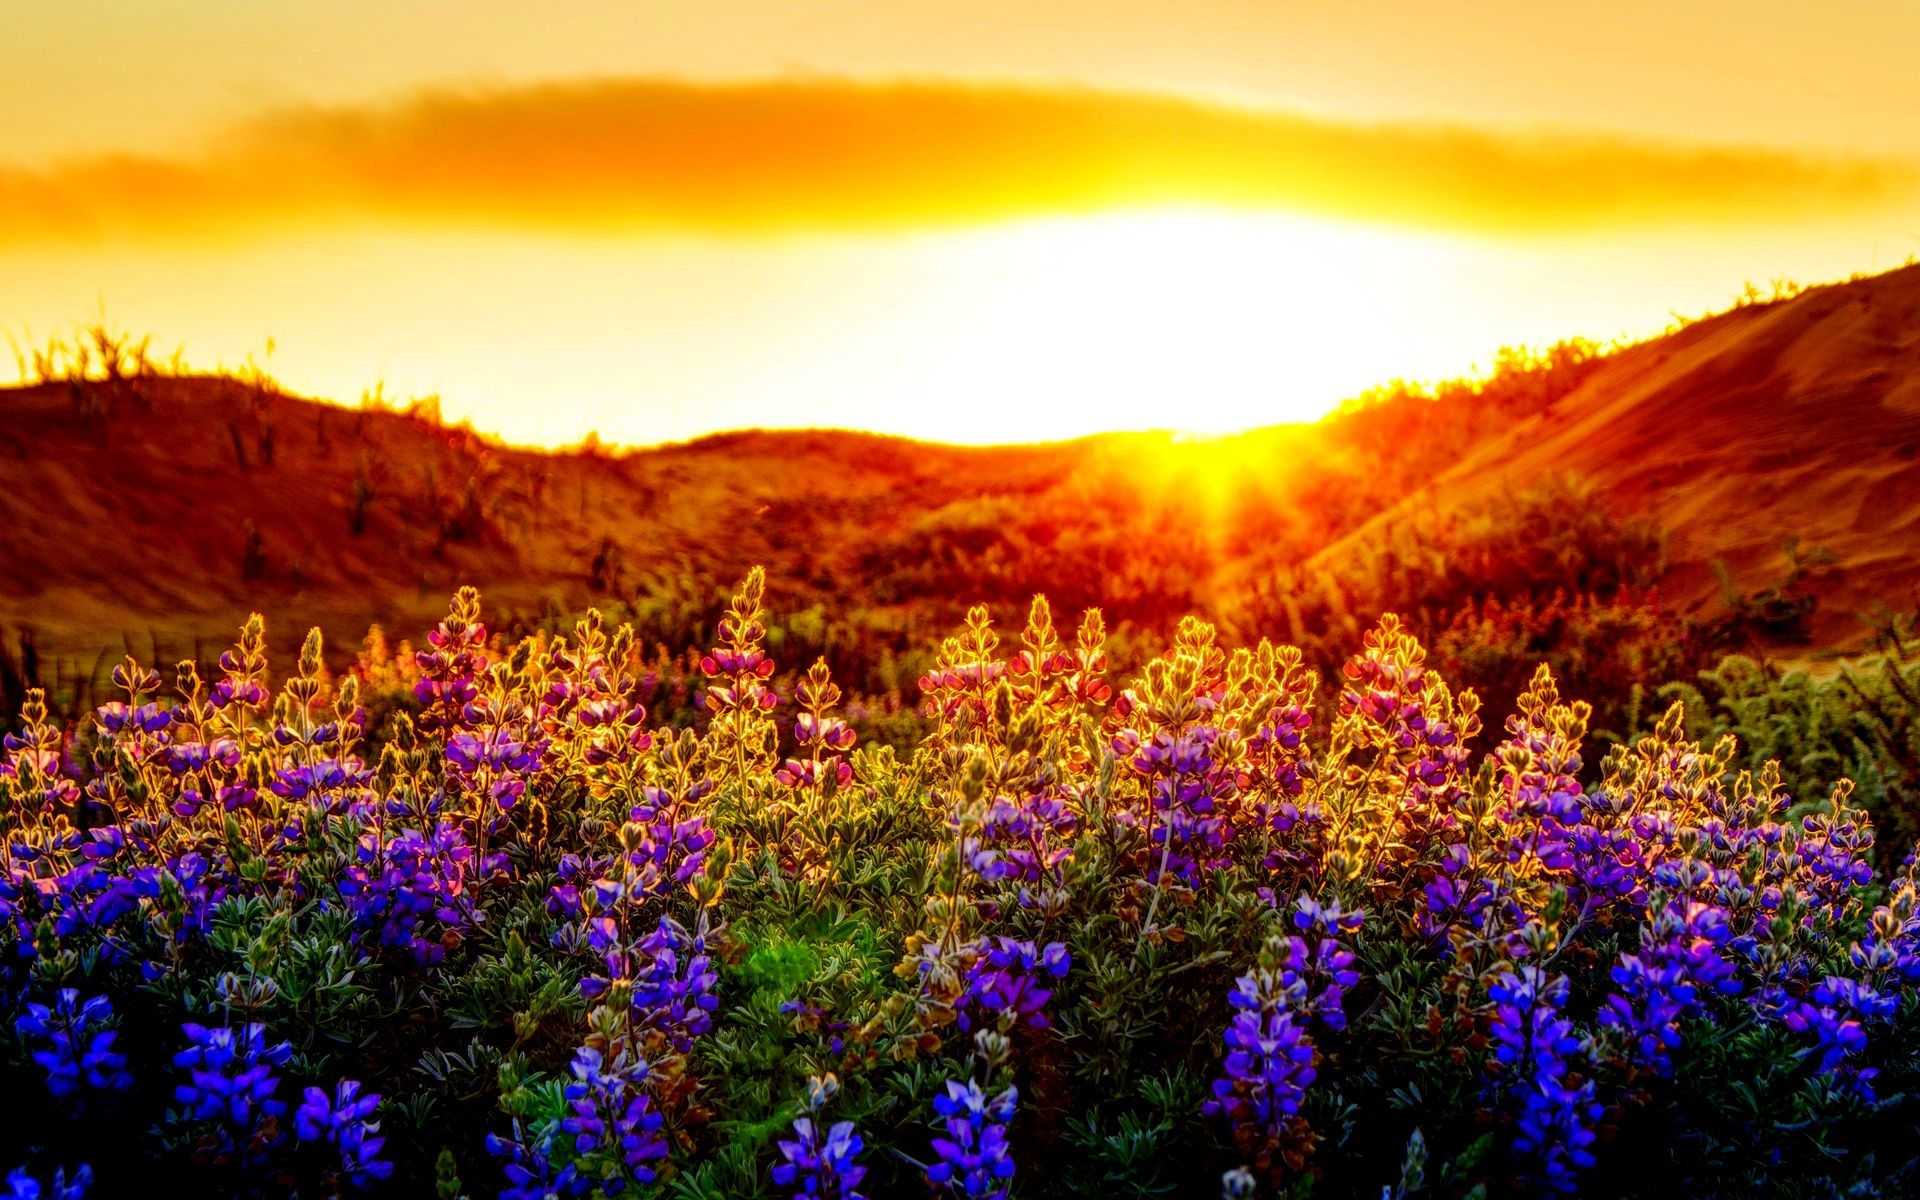 Sunset Wallpaper With Flowers